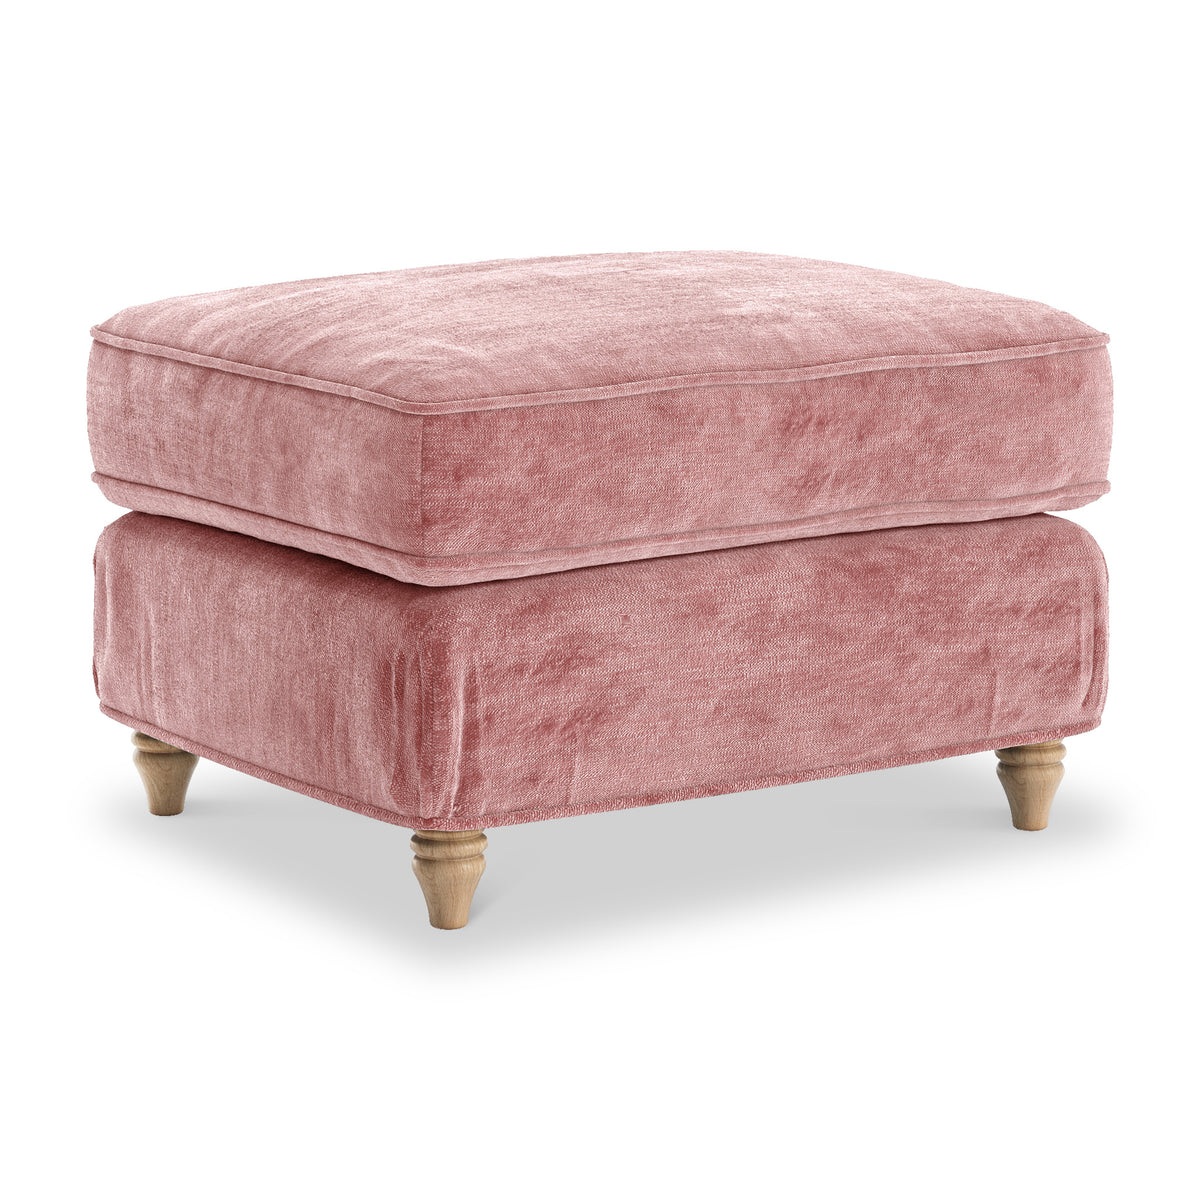 Alfie and Arthur Blush Pink Universal Footstool from Roseland Furniture